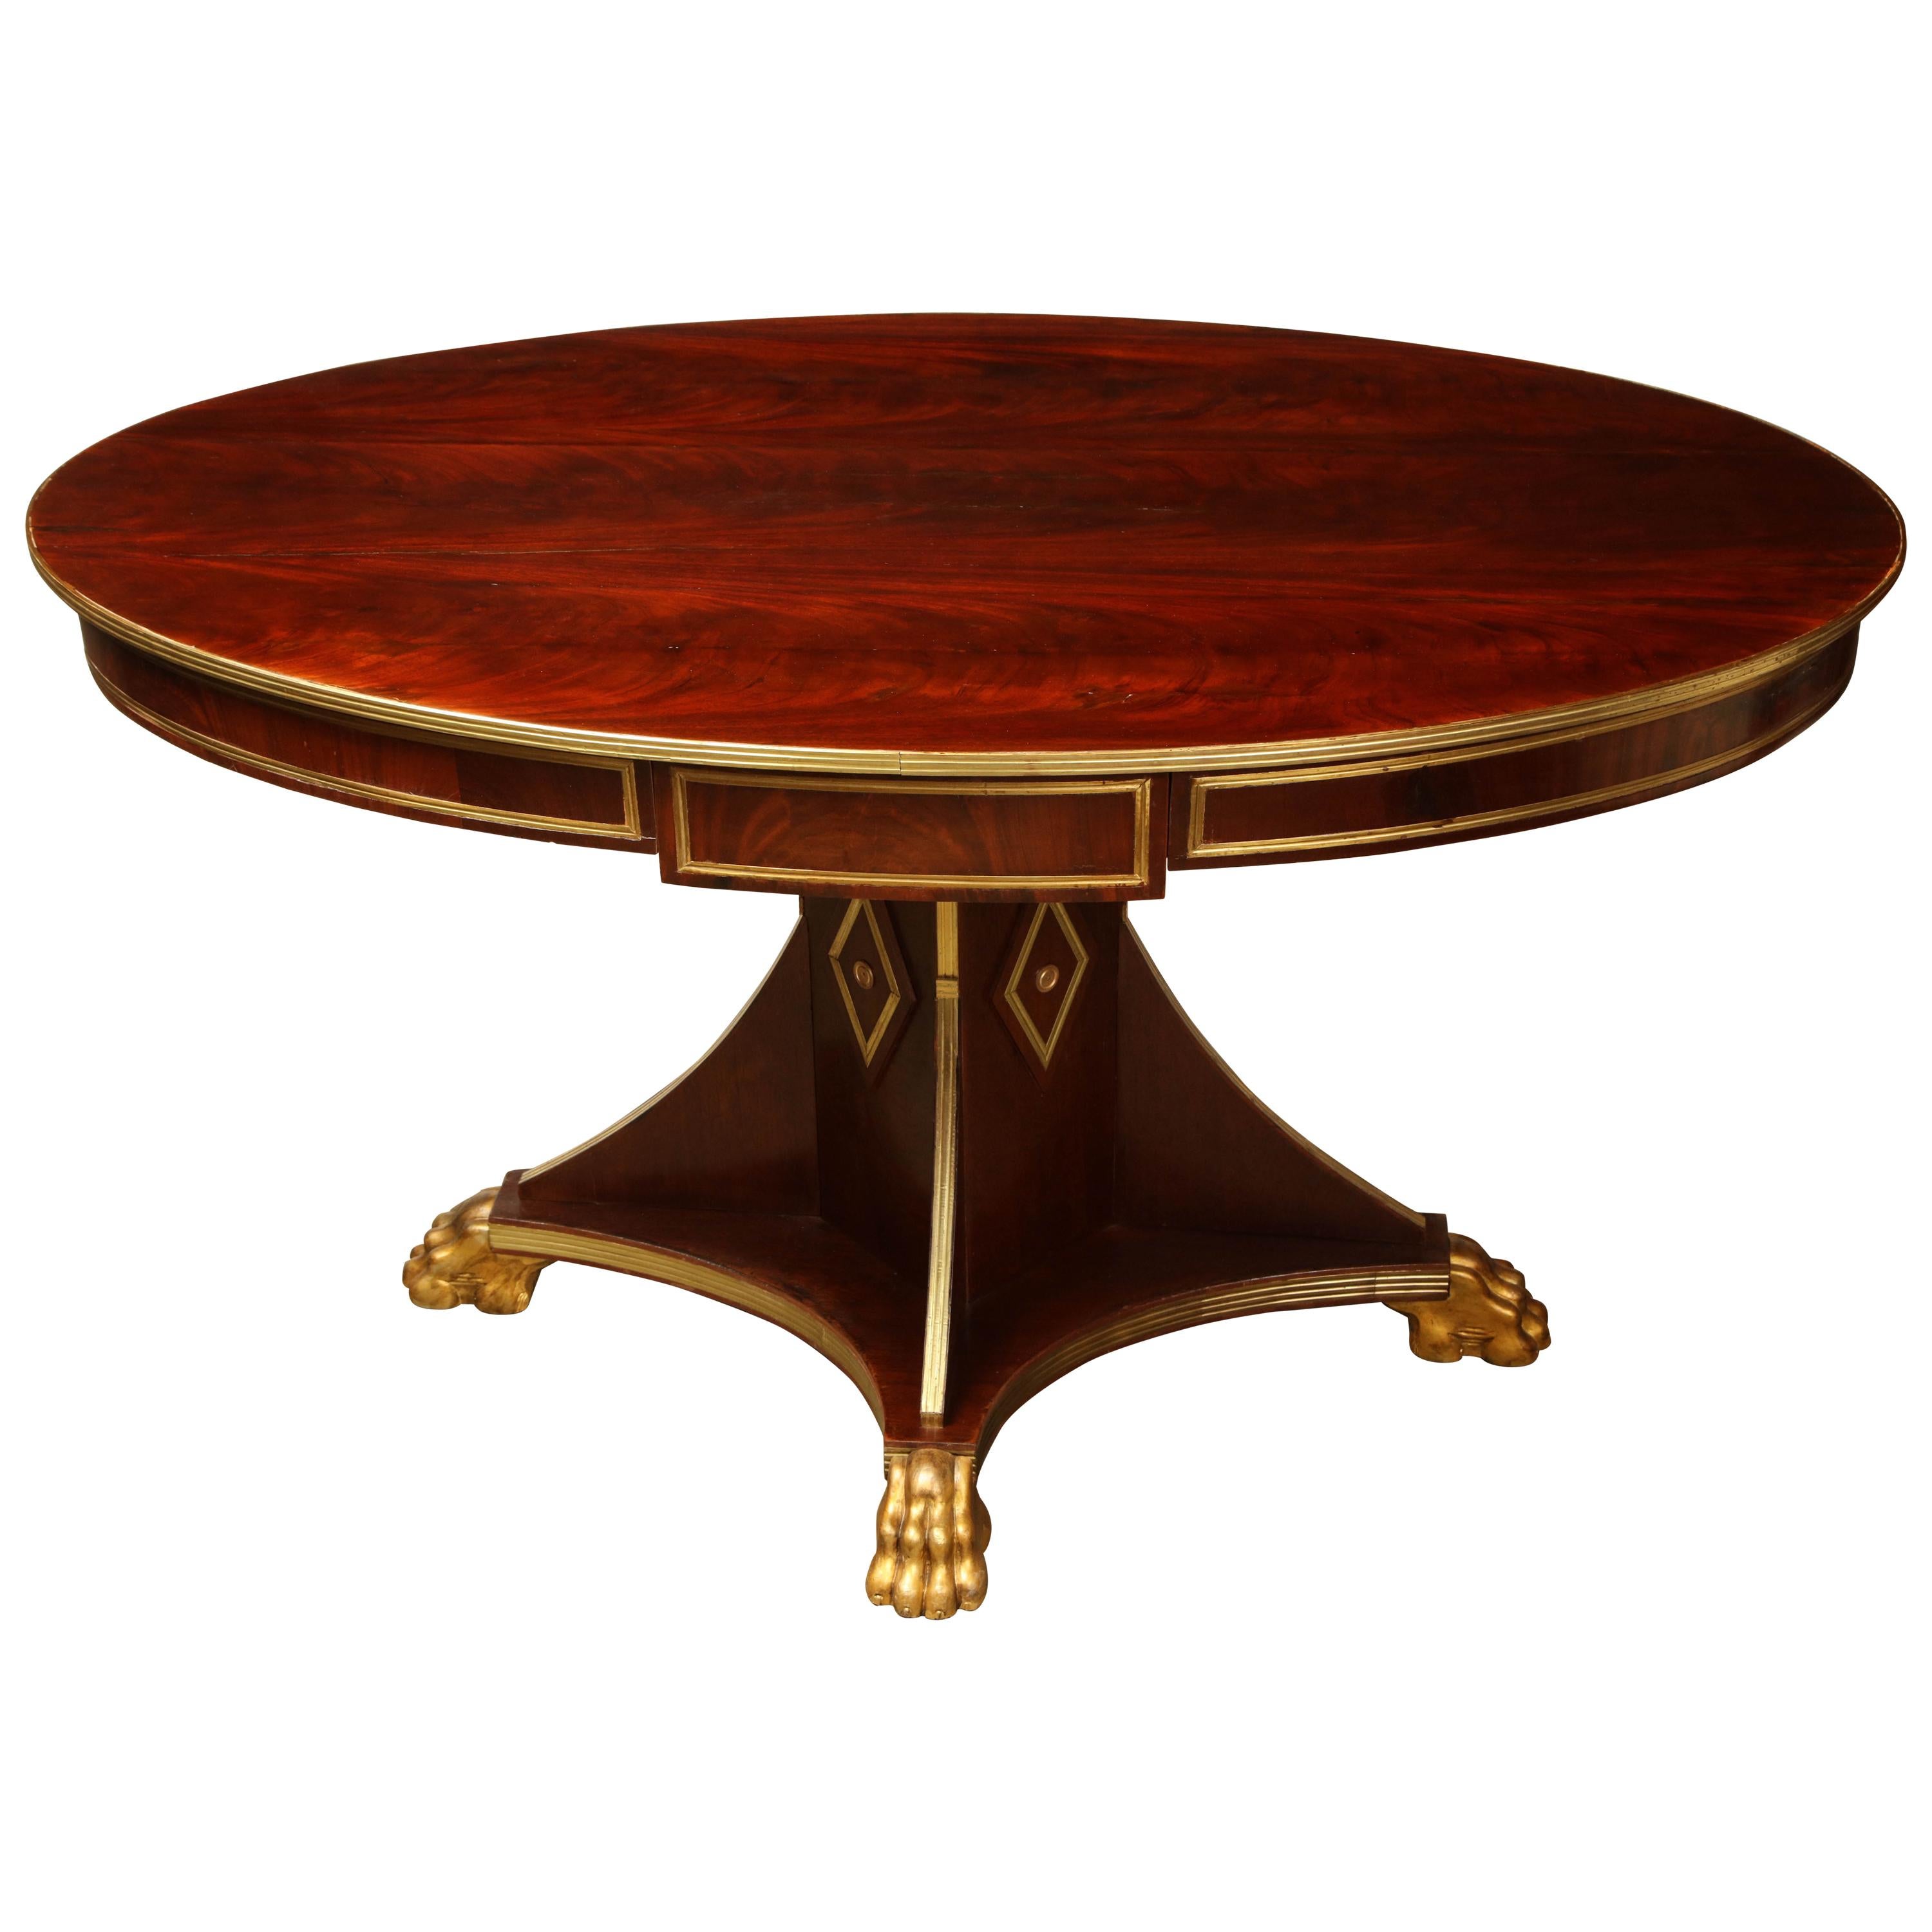 Russian Neoclassic Oval Center Table